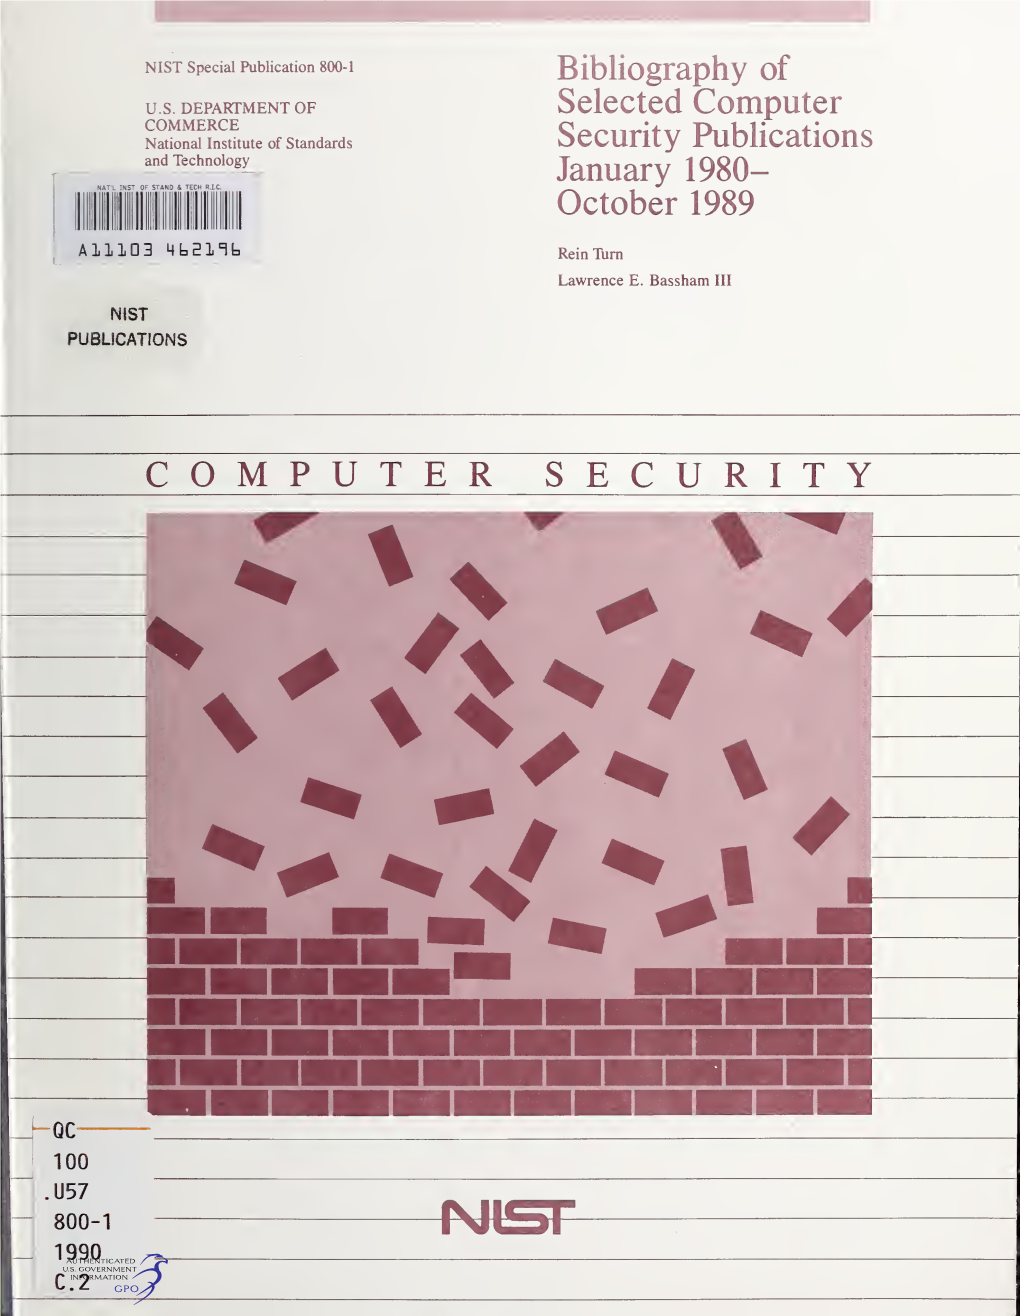 Bibliography of Selected Computer Security Publications January 1980- October 1989